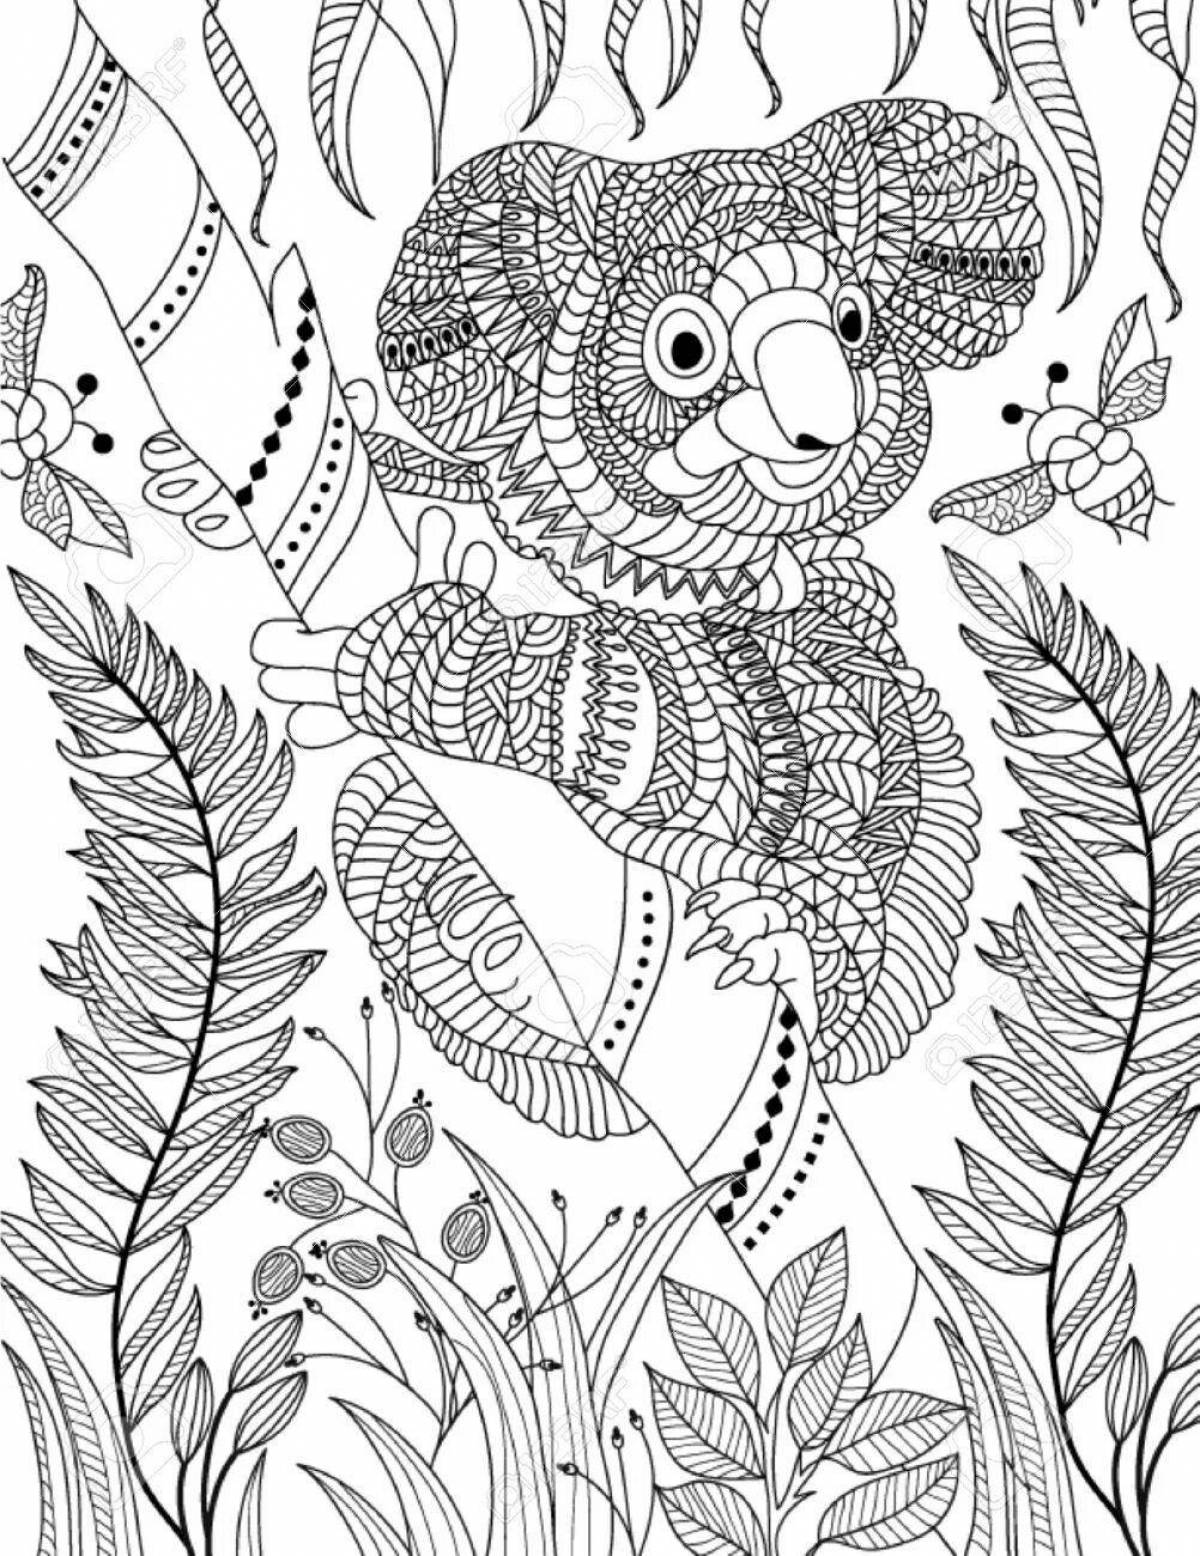 Exquisite animal coloring pages for adults